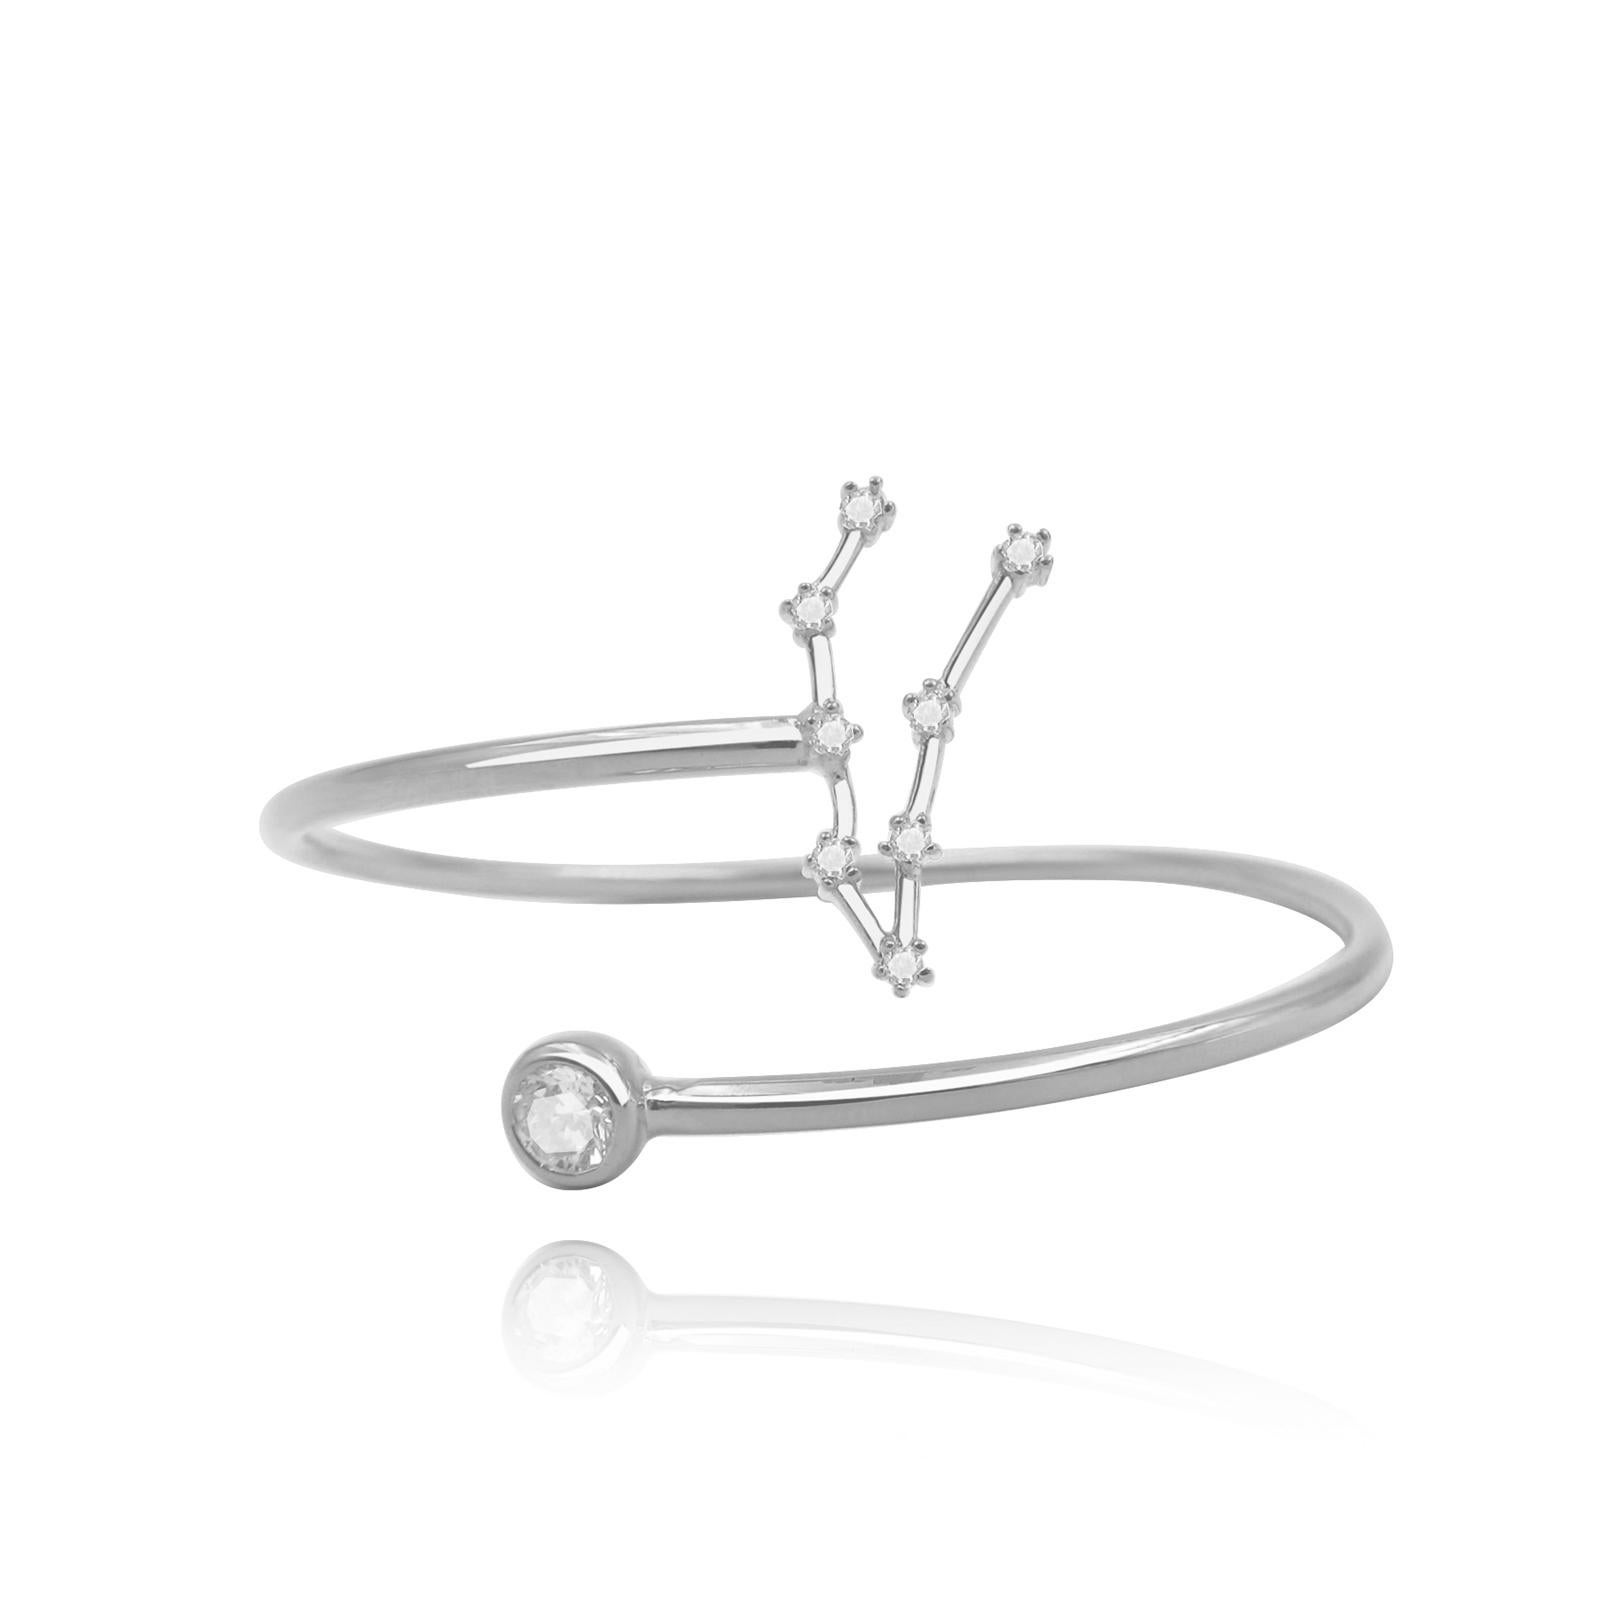 You are unique and your zodiac tells part of your story.  How your zodiac is displayed in the beautiful nighttime sky is what we want you to carry with you always. This capricorn constellation wire bezel cuff shares a part of your personality with